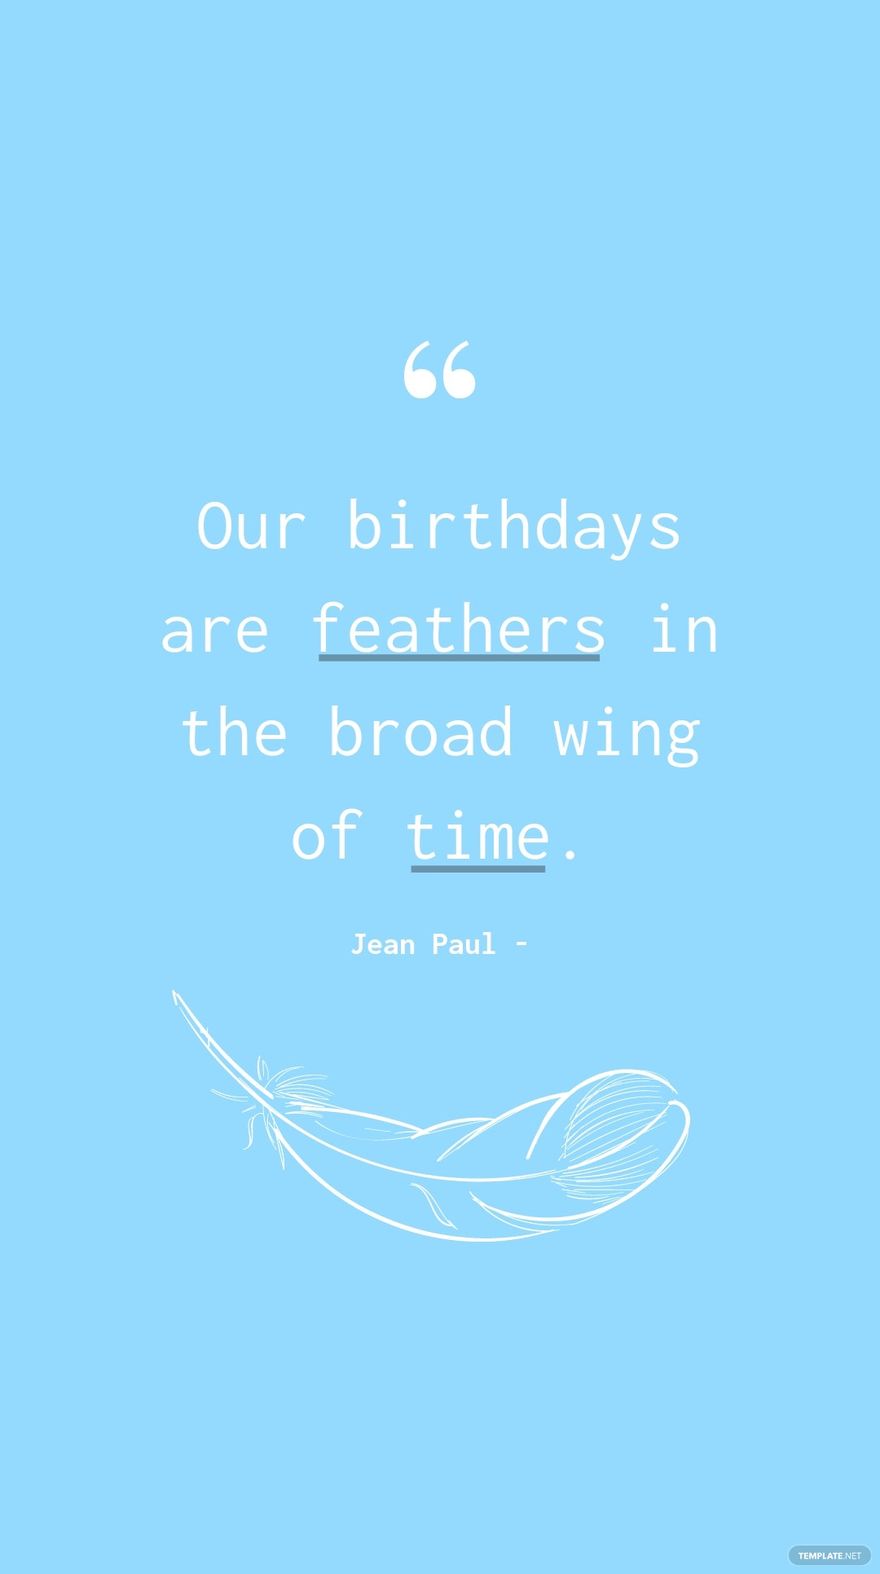 Free Jean Paul - Our birthdays are feathers in the broad wing of time. in JPG